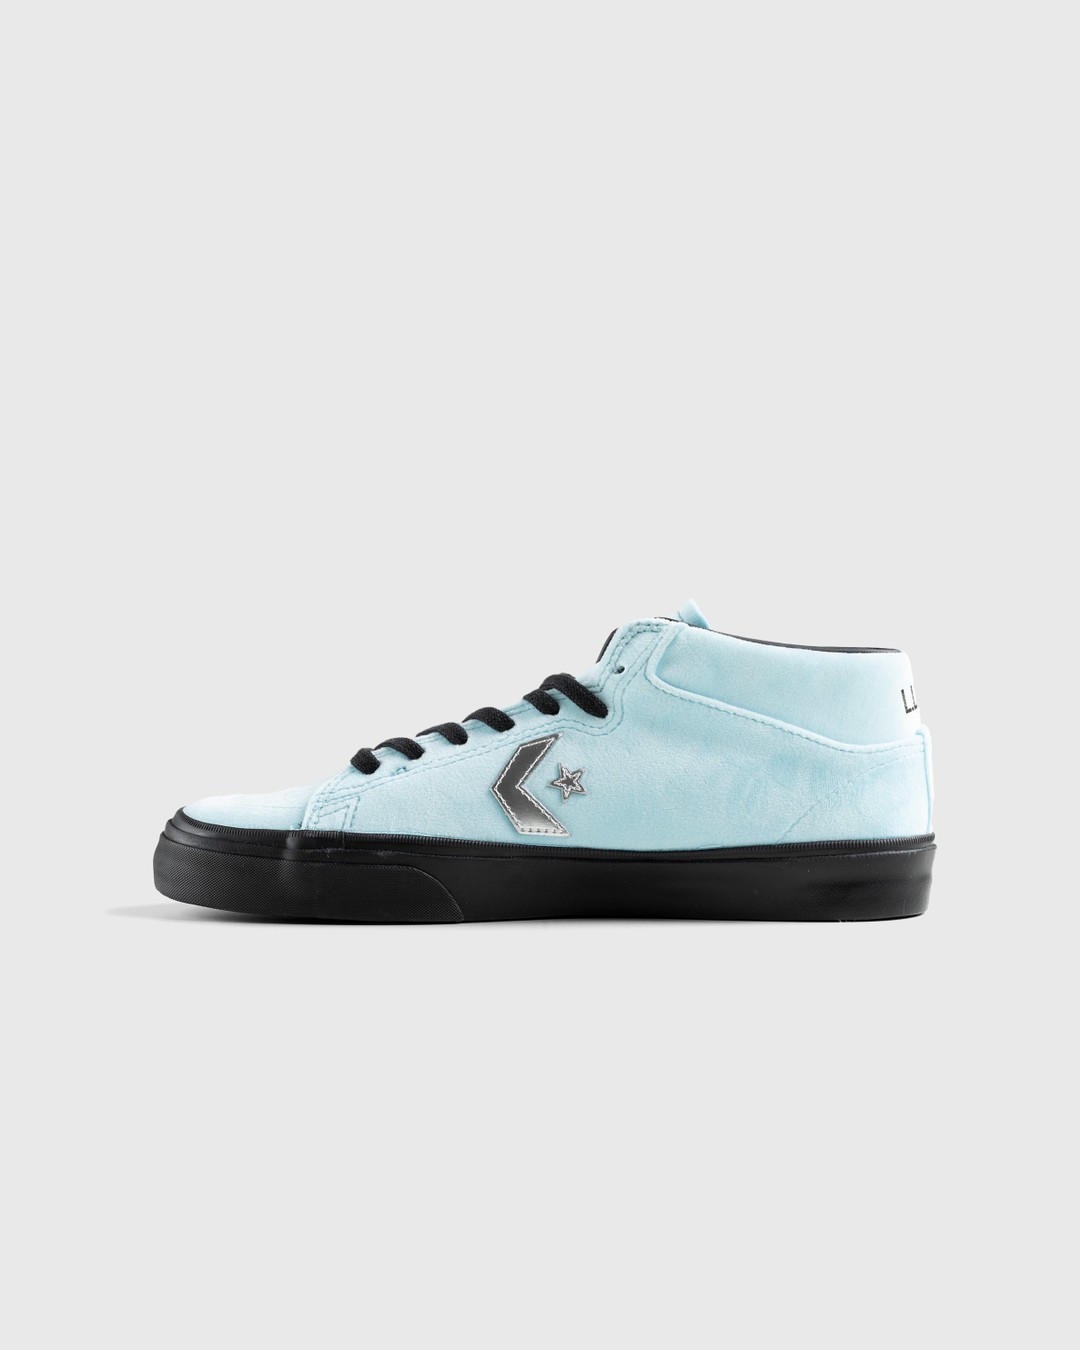 Converse x Fucking Awesome – Louie Lopez Pro Mid Cyan Tint/Black - High Top Sneakers - Blue - Image 2